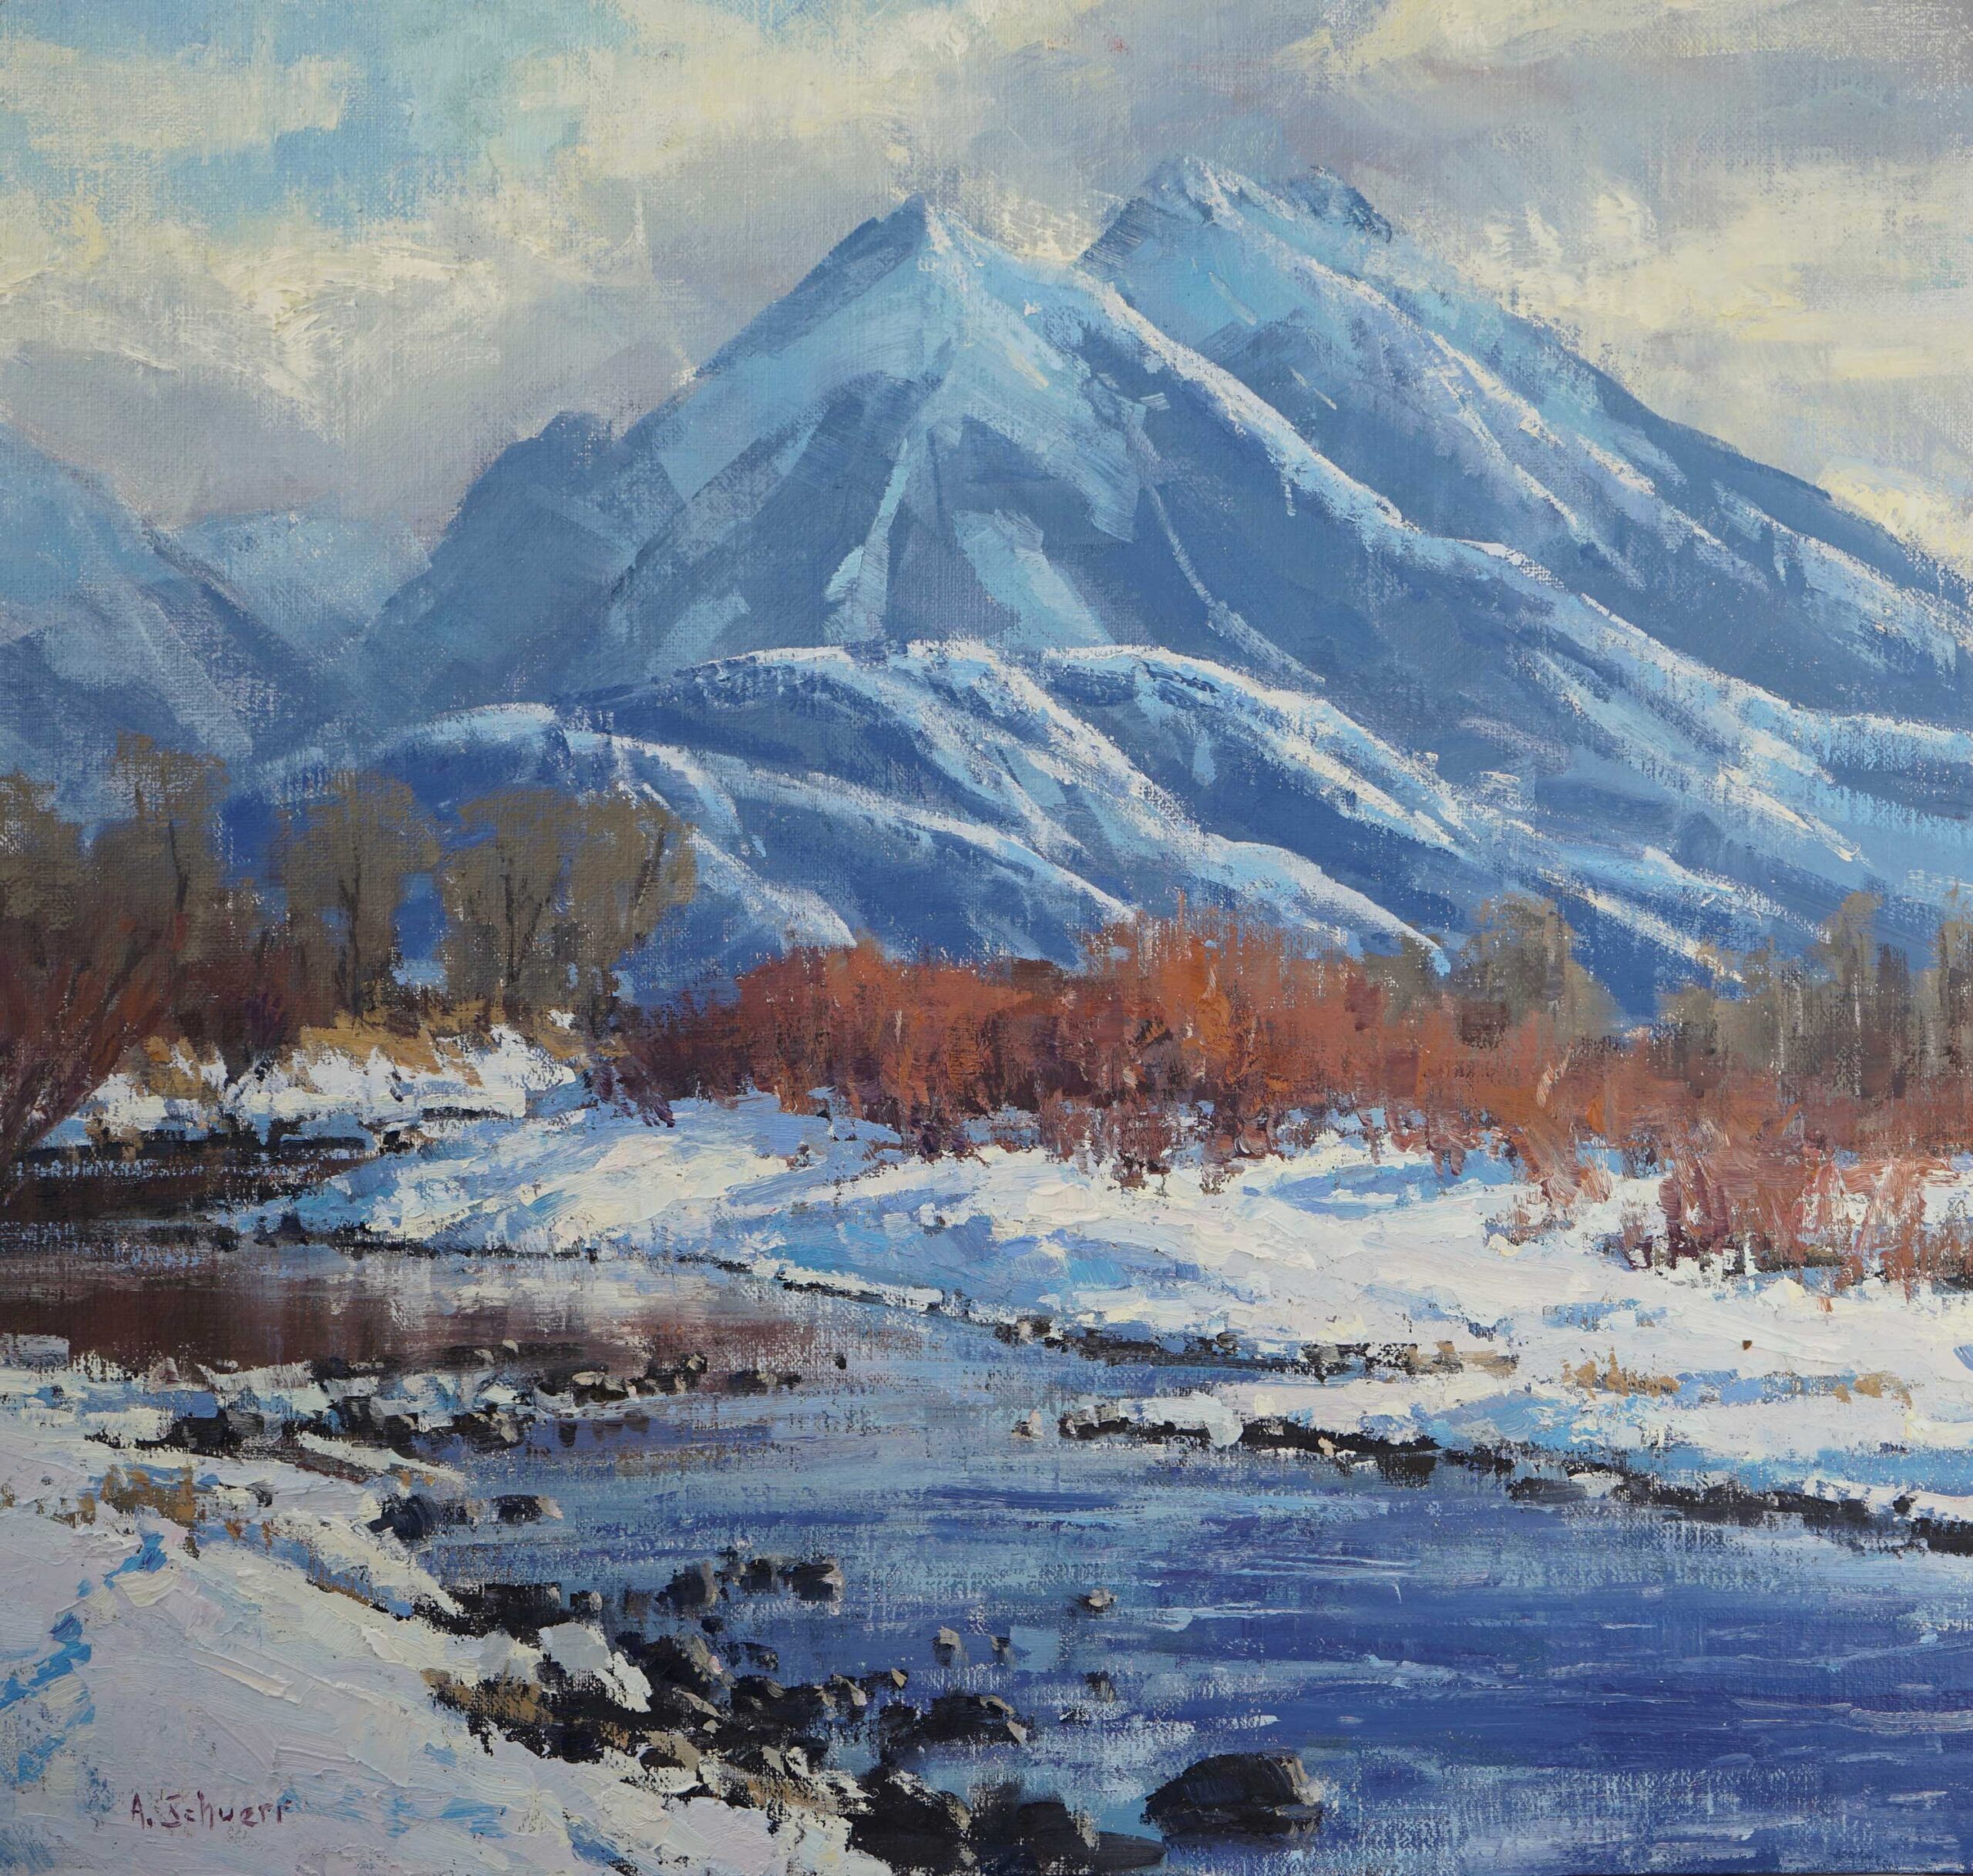 Painting winter landscapes - Aaron Schuerr, “Emigrant Peak,” 2019, oil, 17 x 18 in., Available from artist, Plein air